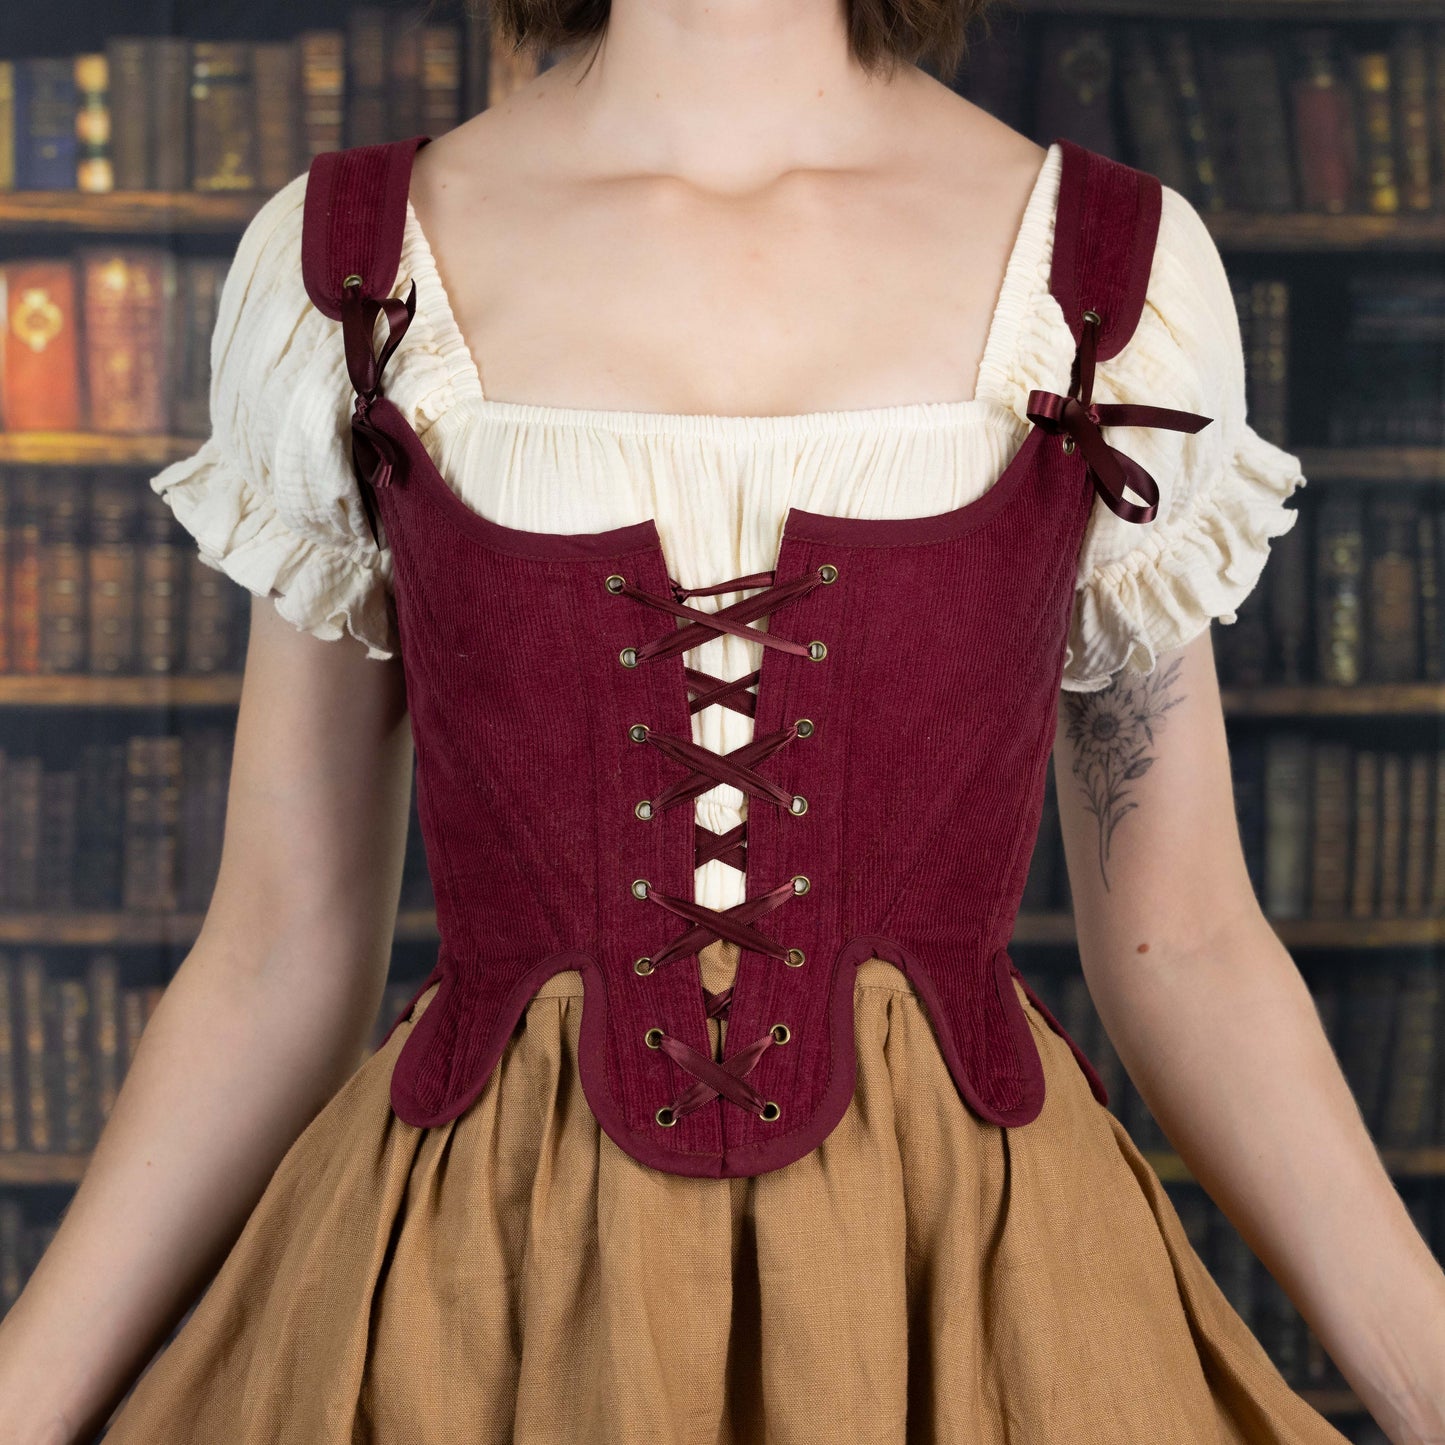 Regency Stays, Renaissance Corset Bodice in ANY FABRIC Victorian